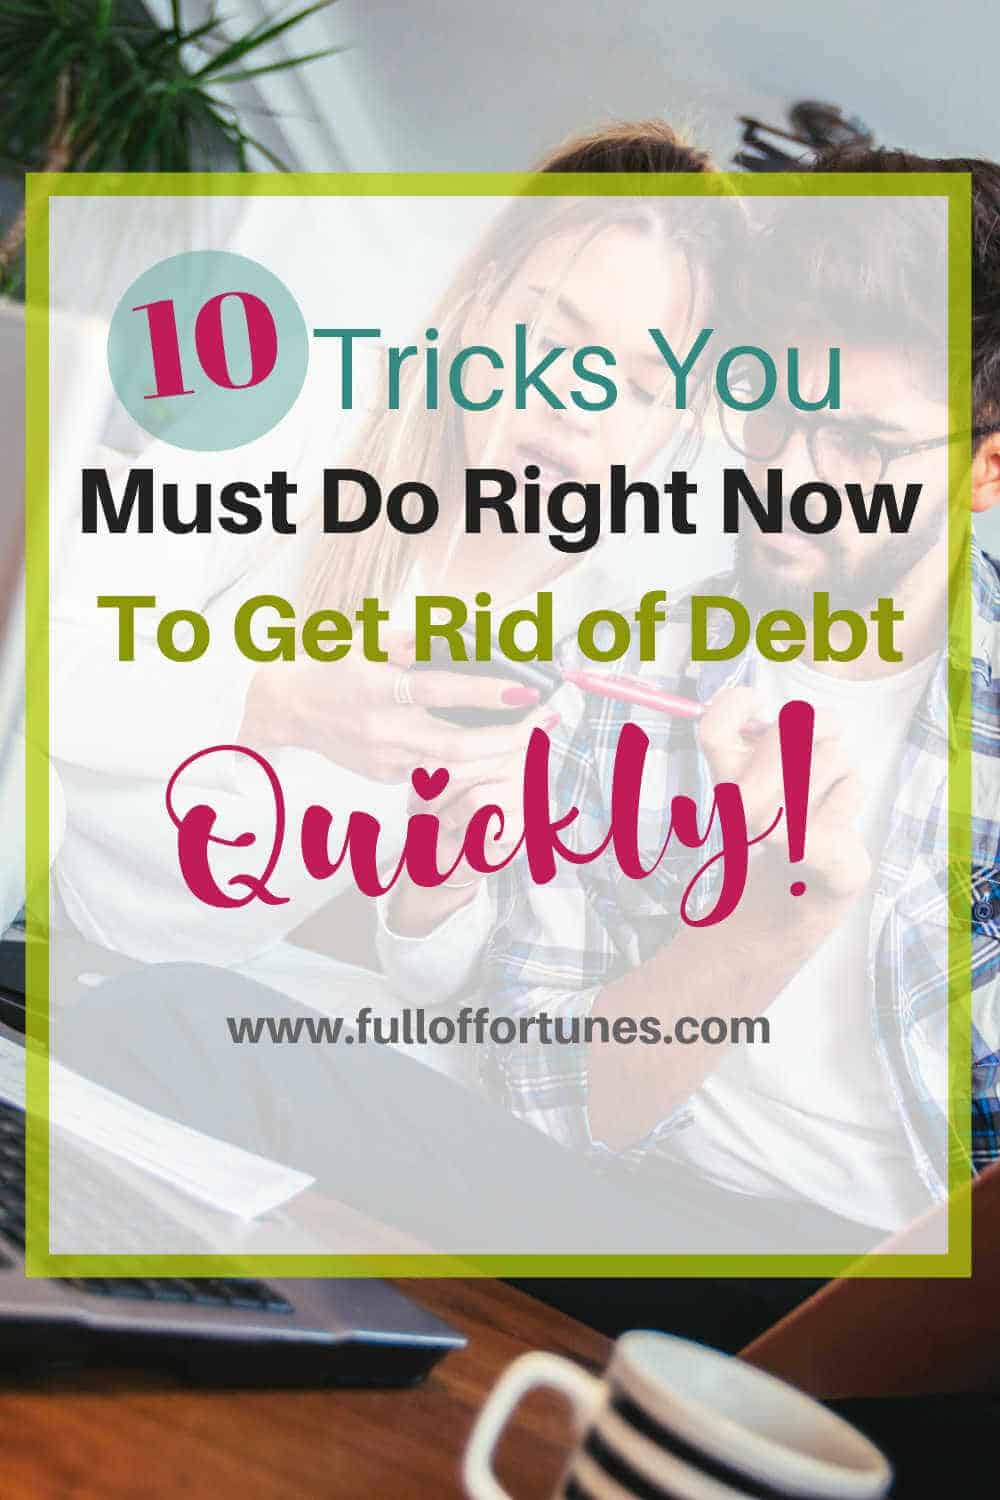 10 Tricks You Must Do Right Now To Get Rid Of Your Debt Quickly!